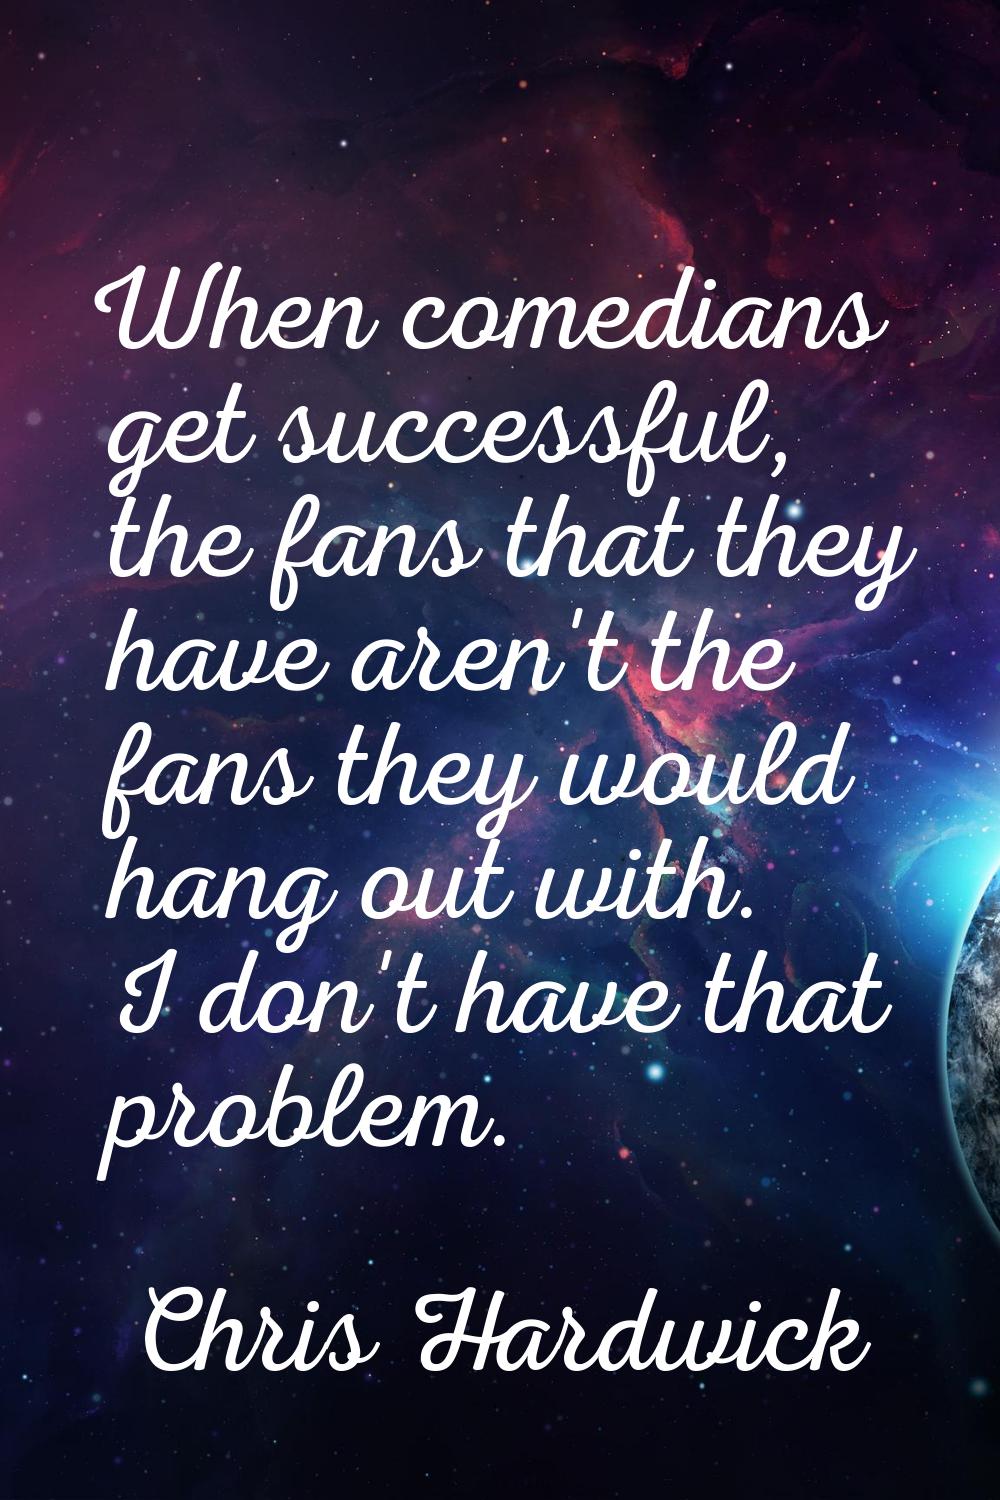 When comedians get successful, the fans that they have aren't the fans they would hang out with. I 